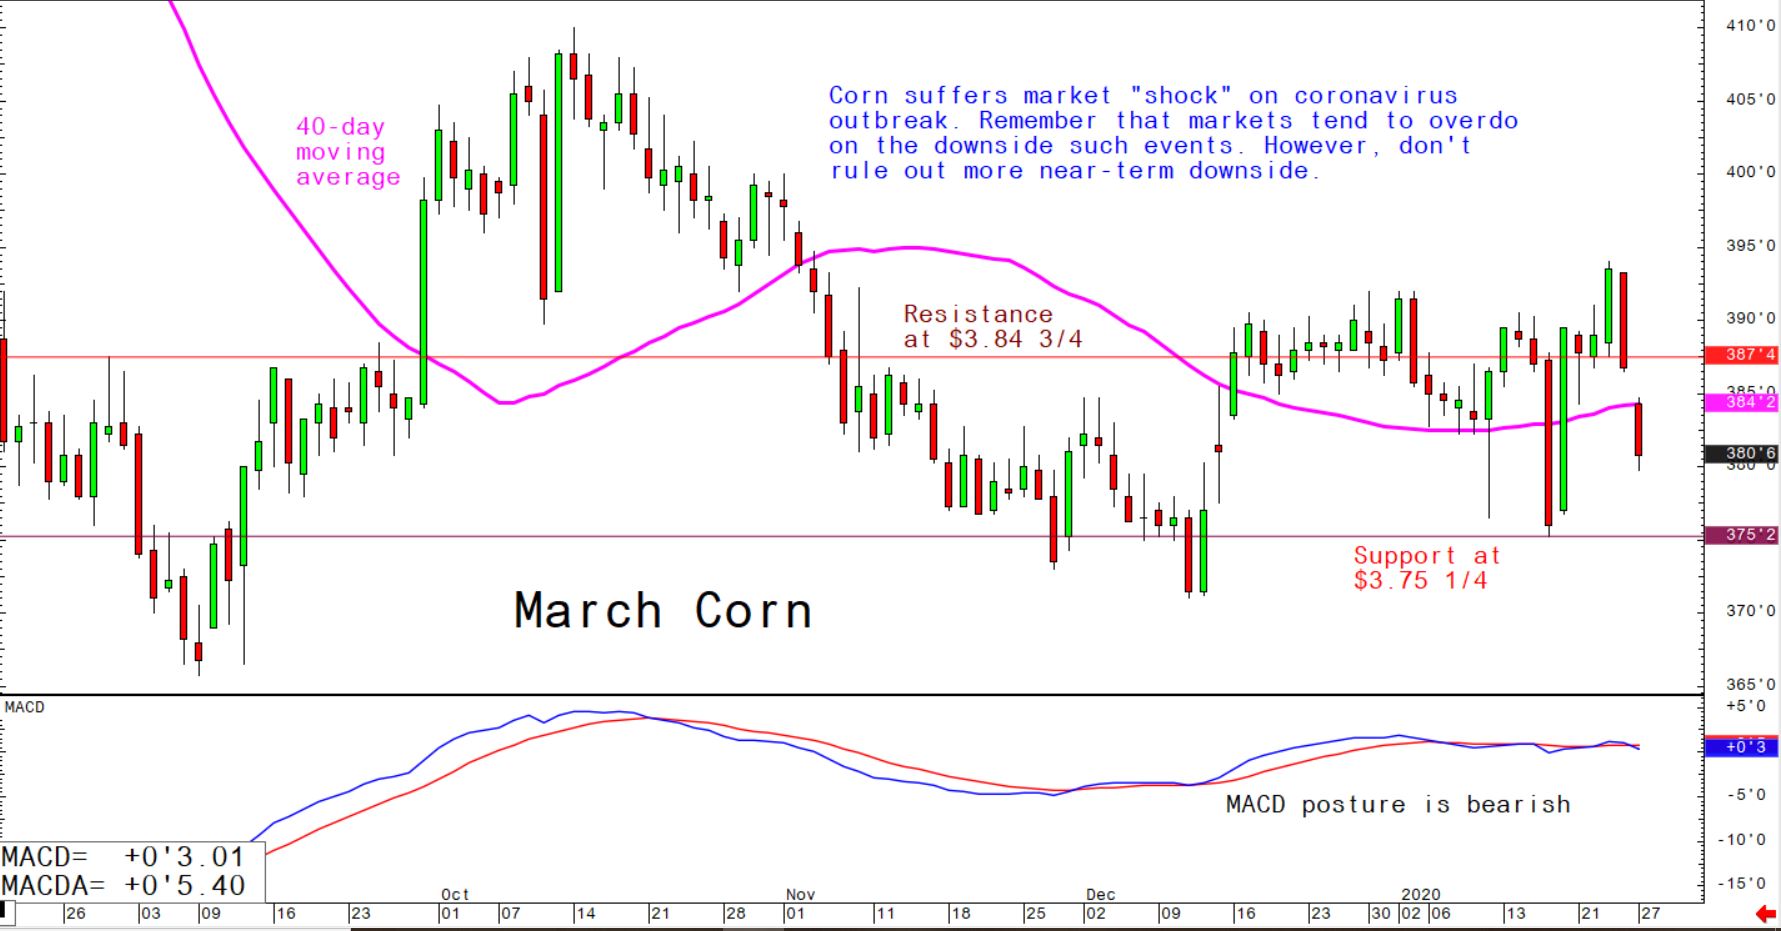 Corn suffers market "shock" on coronavirus outbreak; remember that markets tend to overdo on the downside such events, however, don't rule out more near-term downside